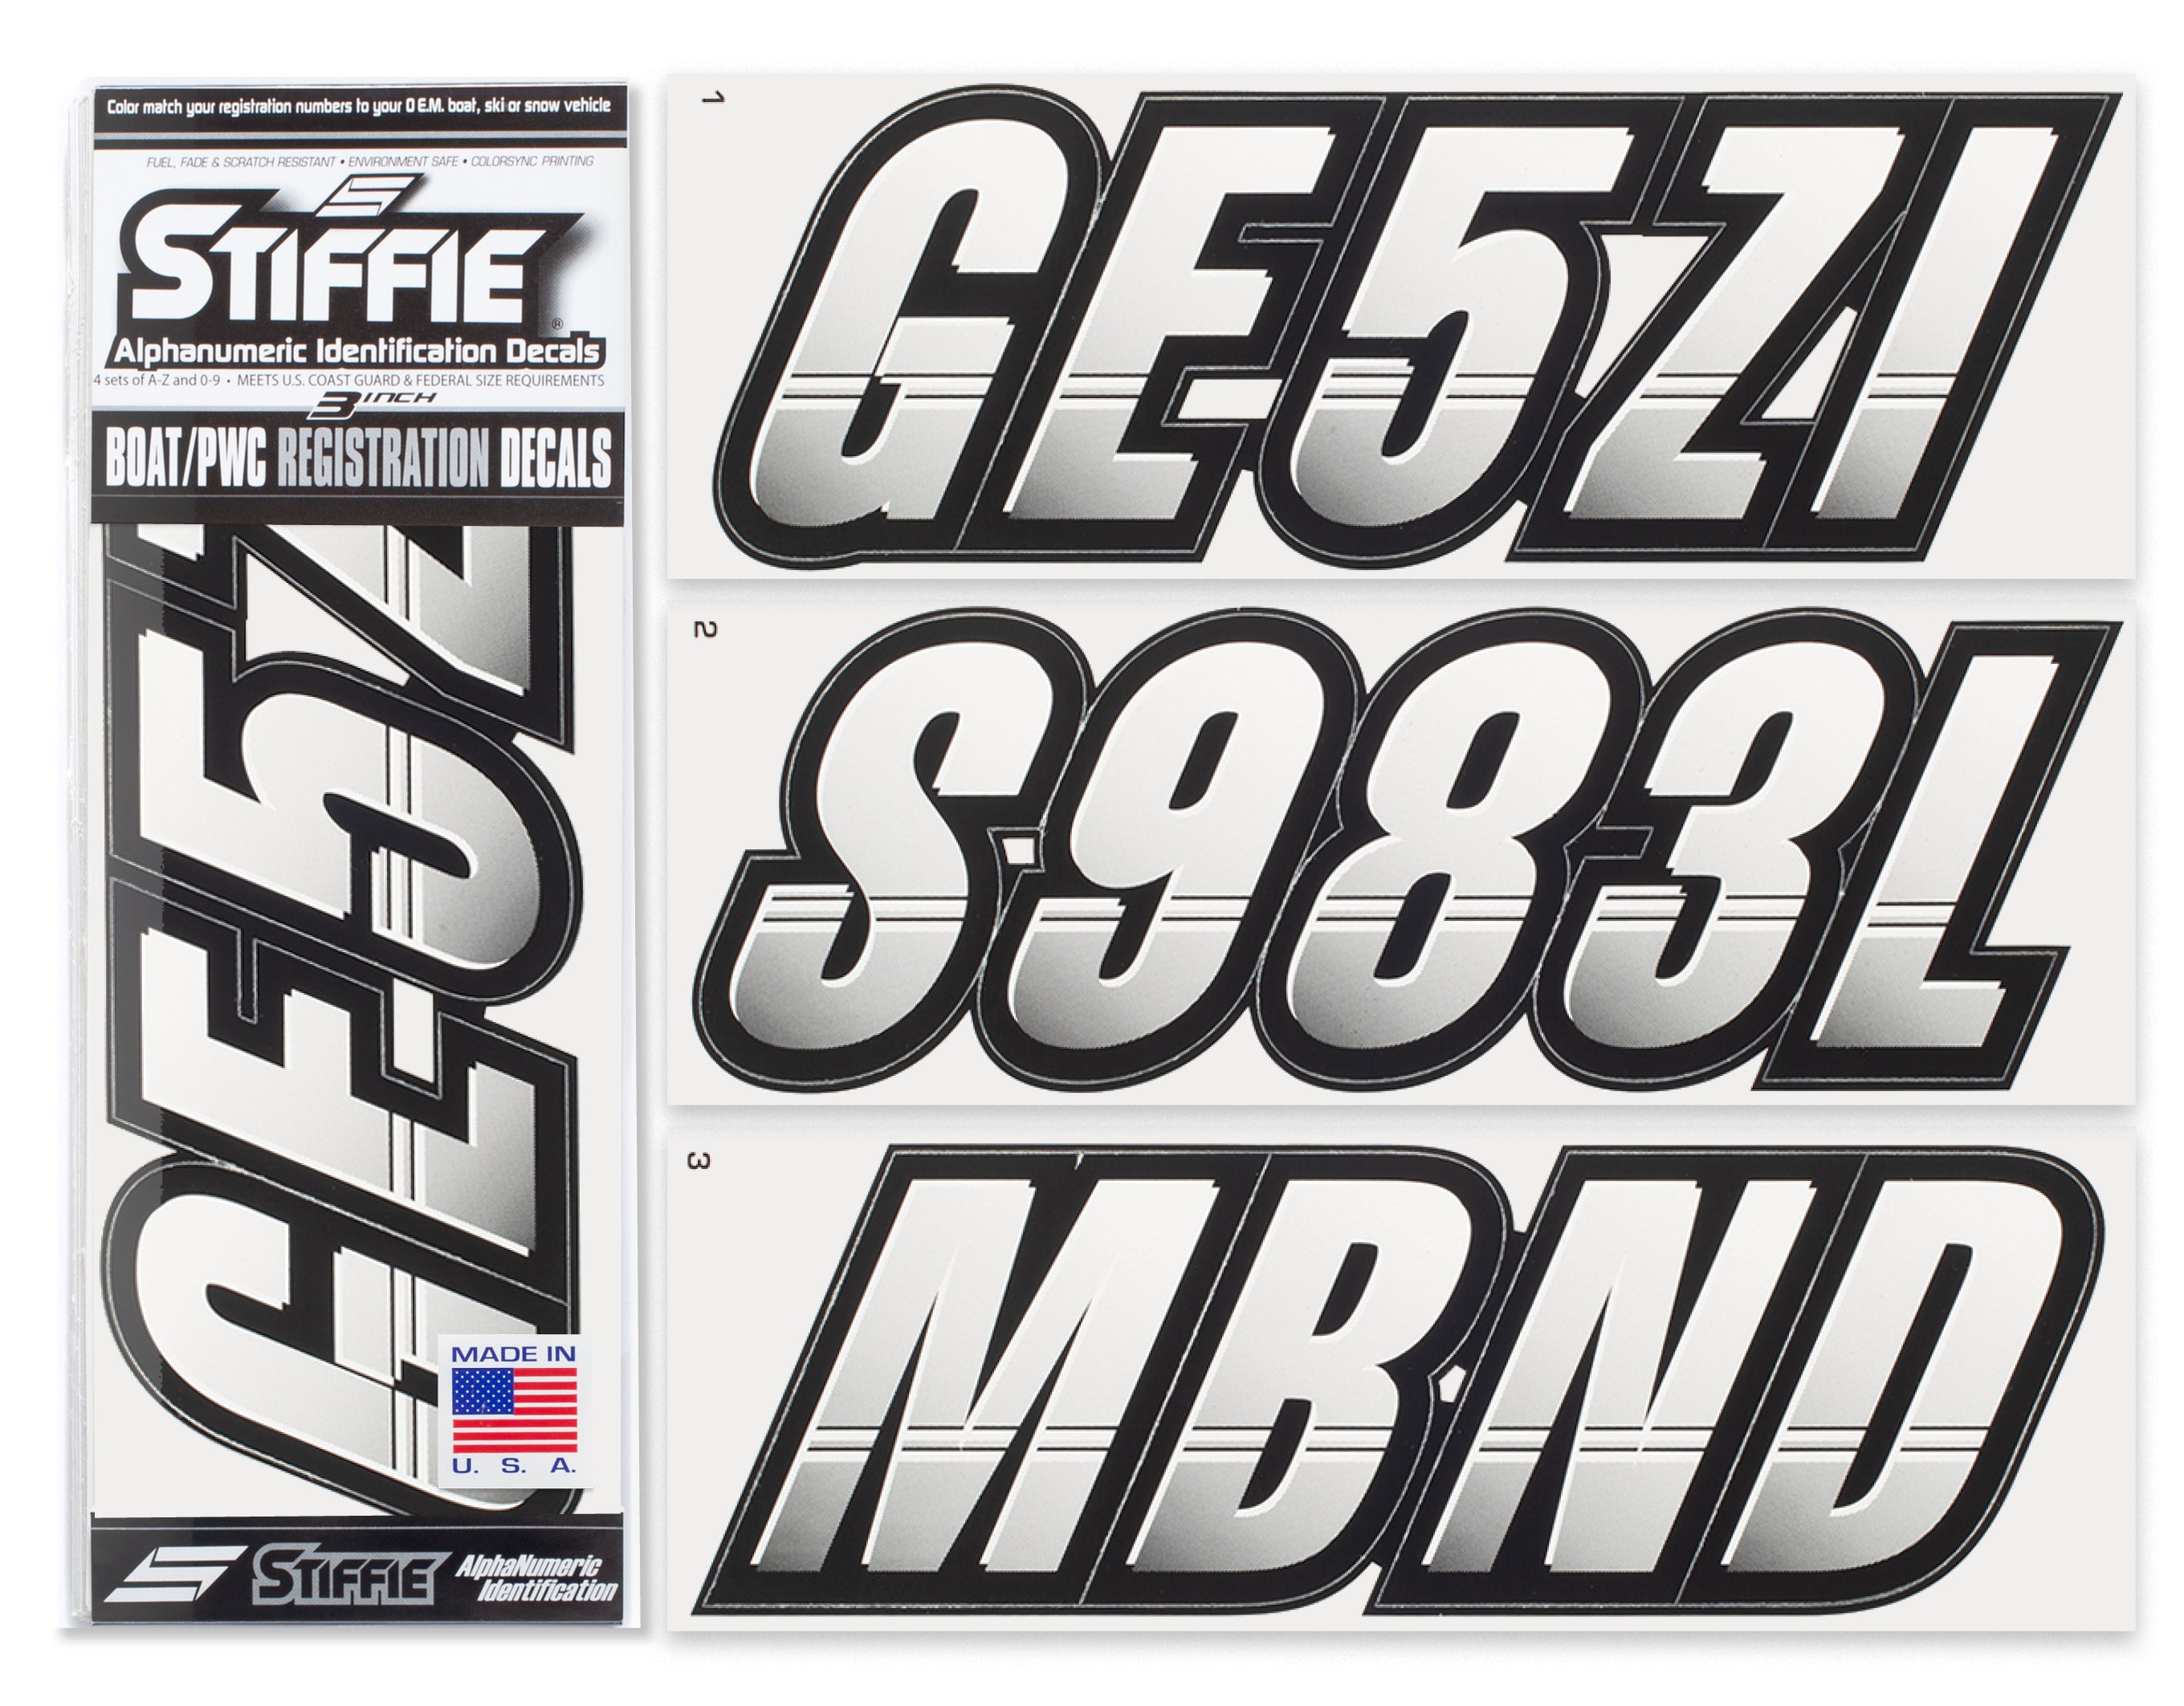 STIFFIE Techtron White/Black 3" Alpha-Numeric Registration Identification Numbers Stickers Decals for Boats & Personal Watercraft